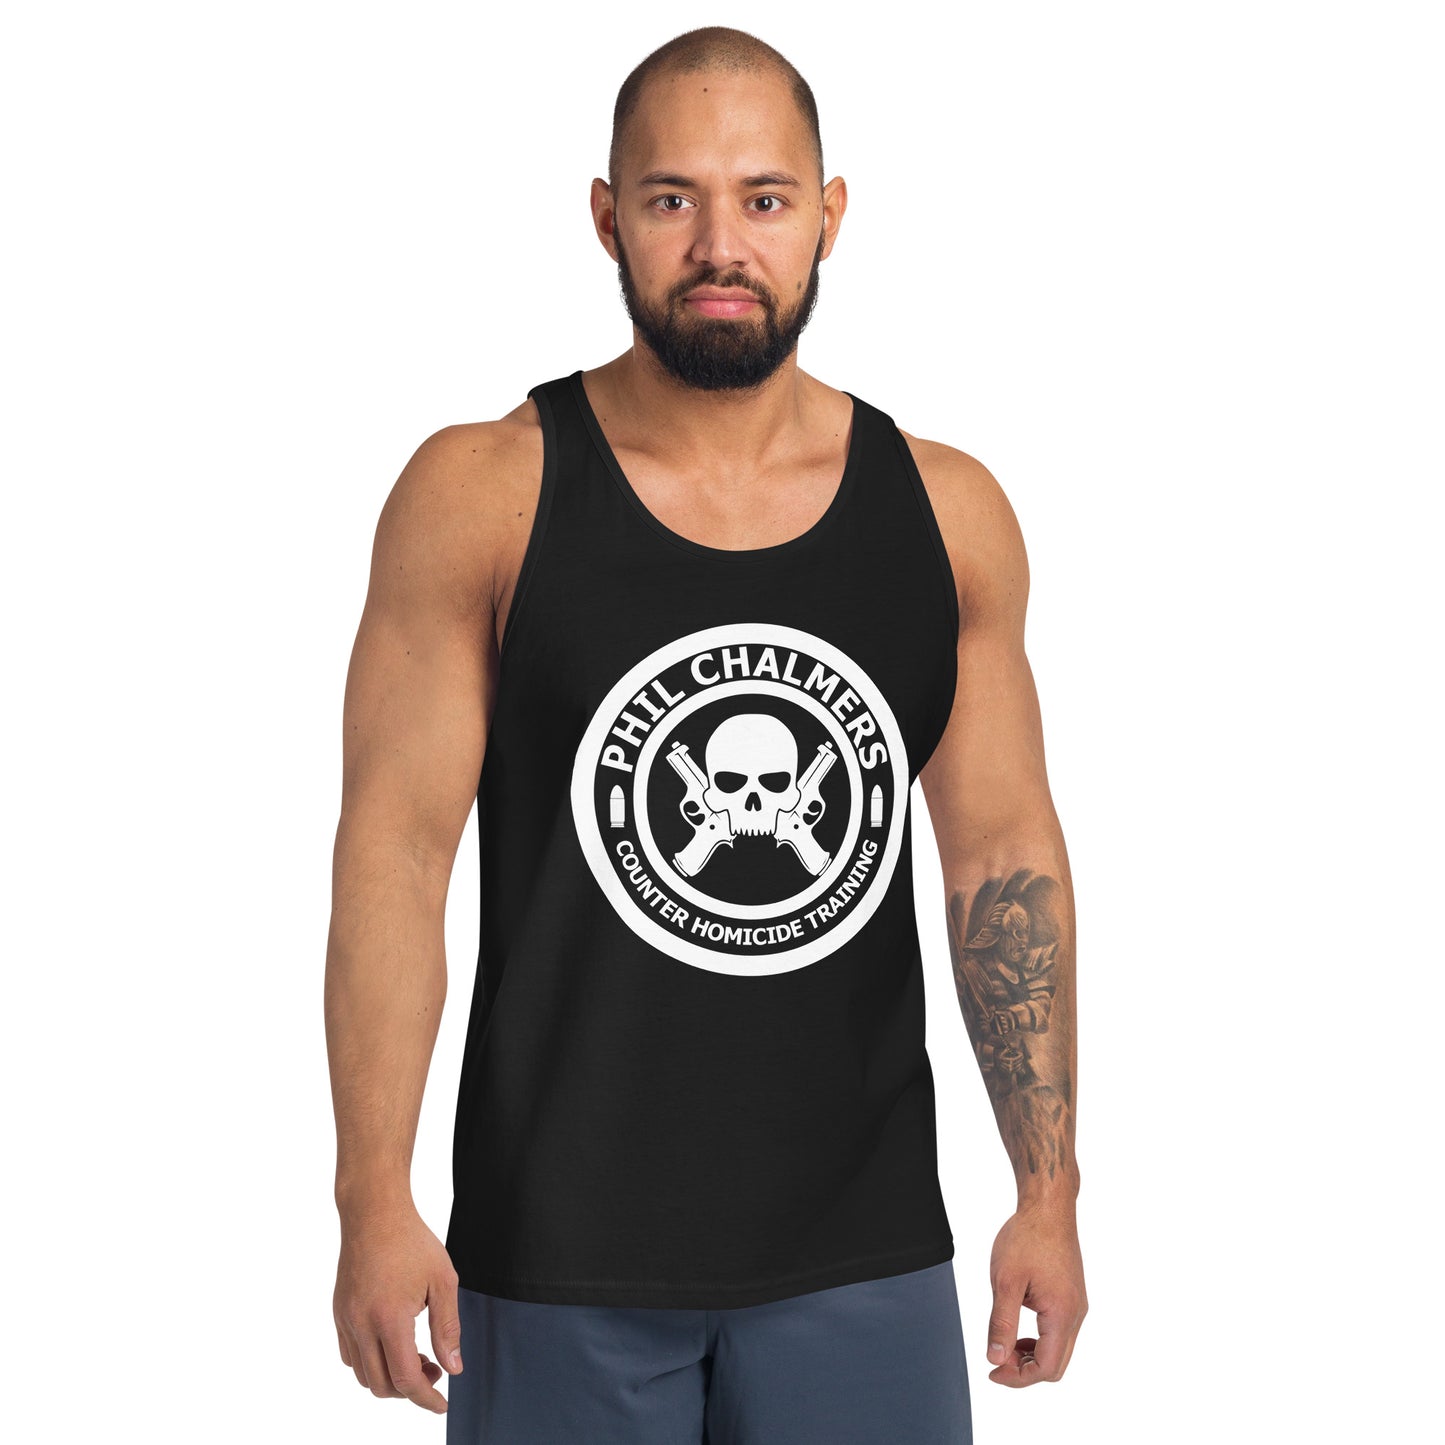 PHIL CHALMERS COUNTER HOMICIDE UNISEX TANK TOP